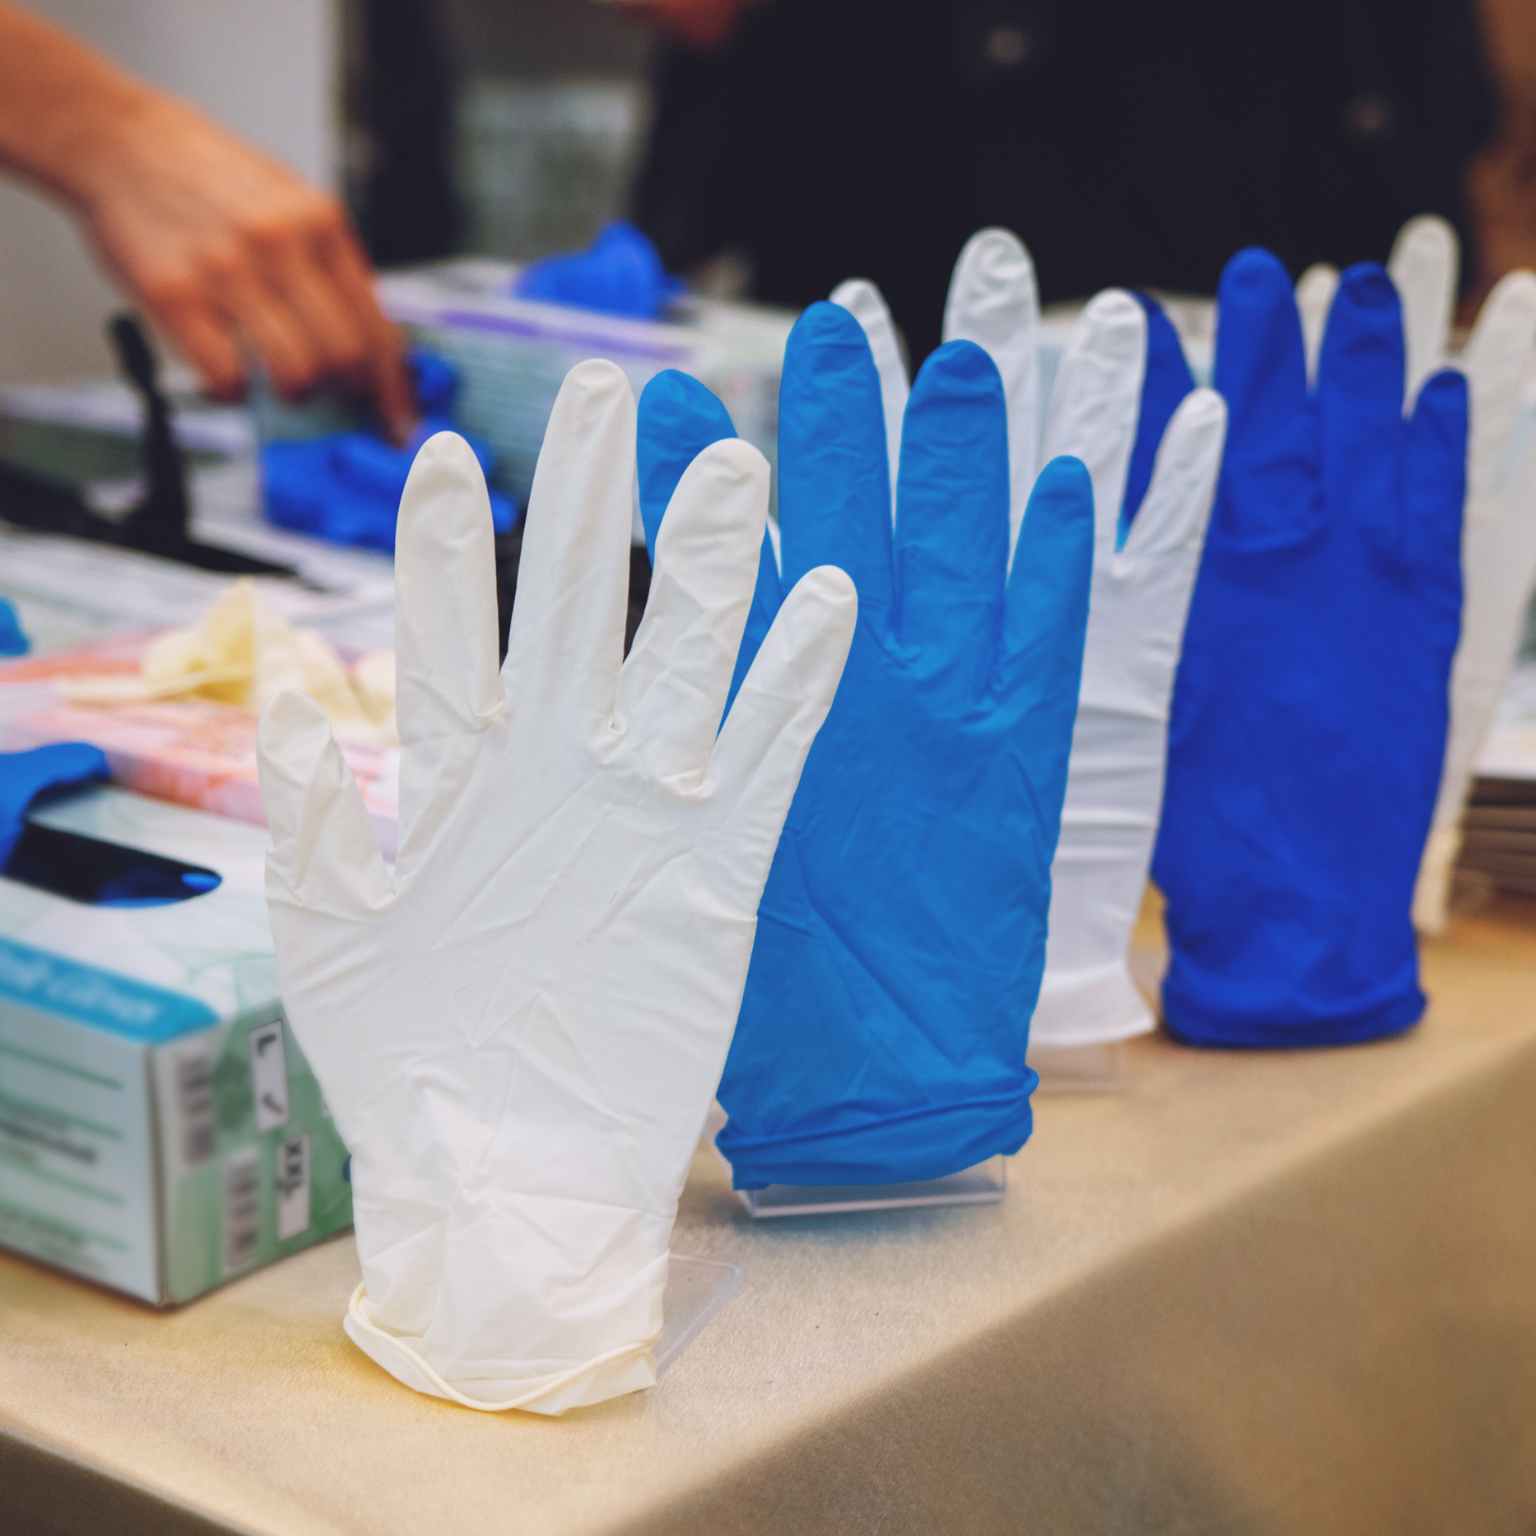 DealChanger Disposable Gloves Products: Nitrile Examination Gloves, Biodegradable Gloves, Eco Friendly Gloves, Diamond Textured, Surgical, Medical 